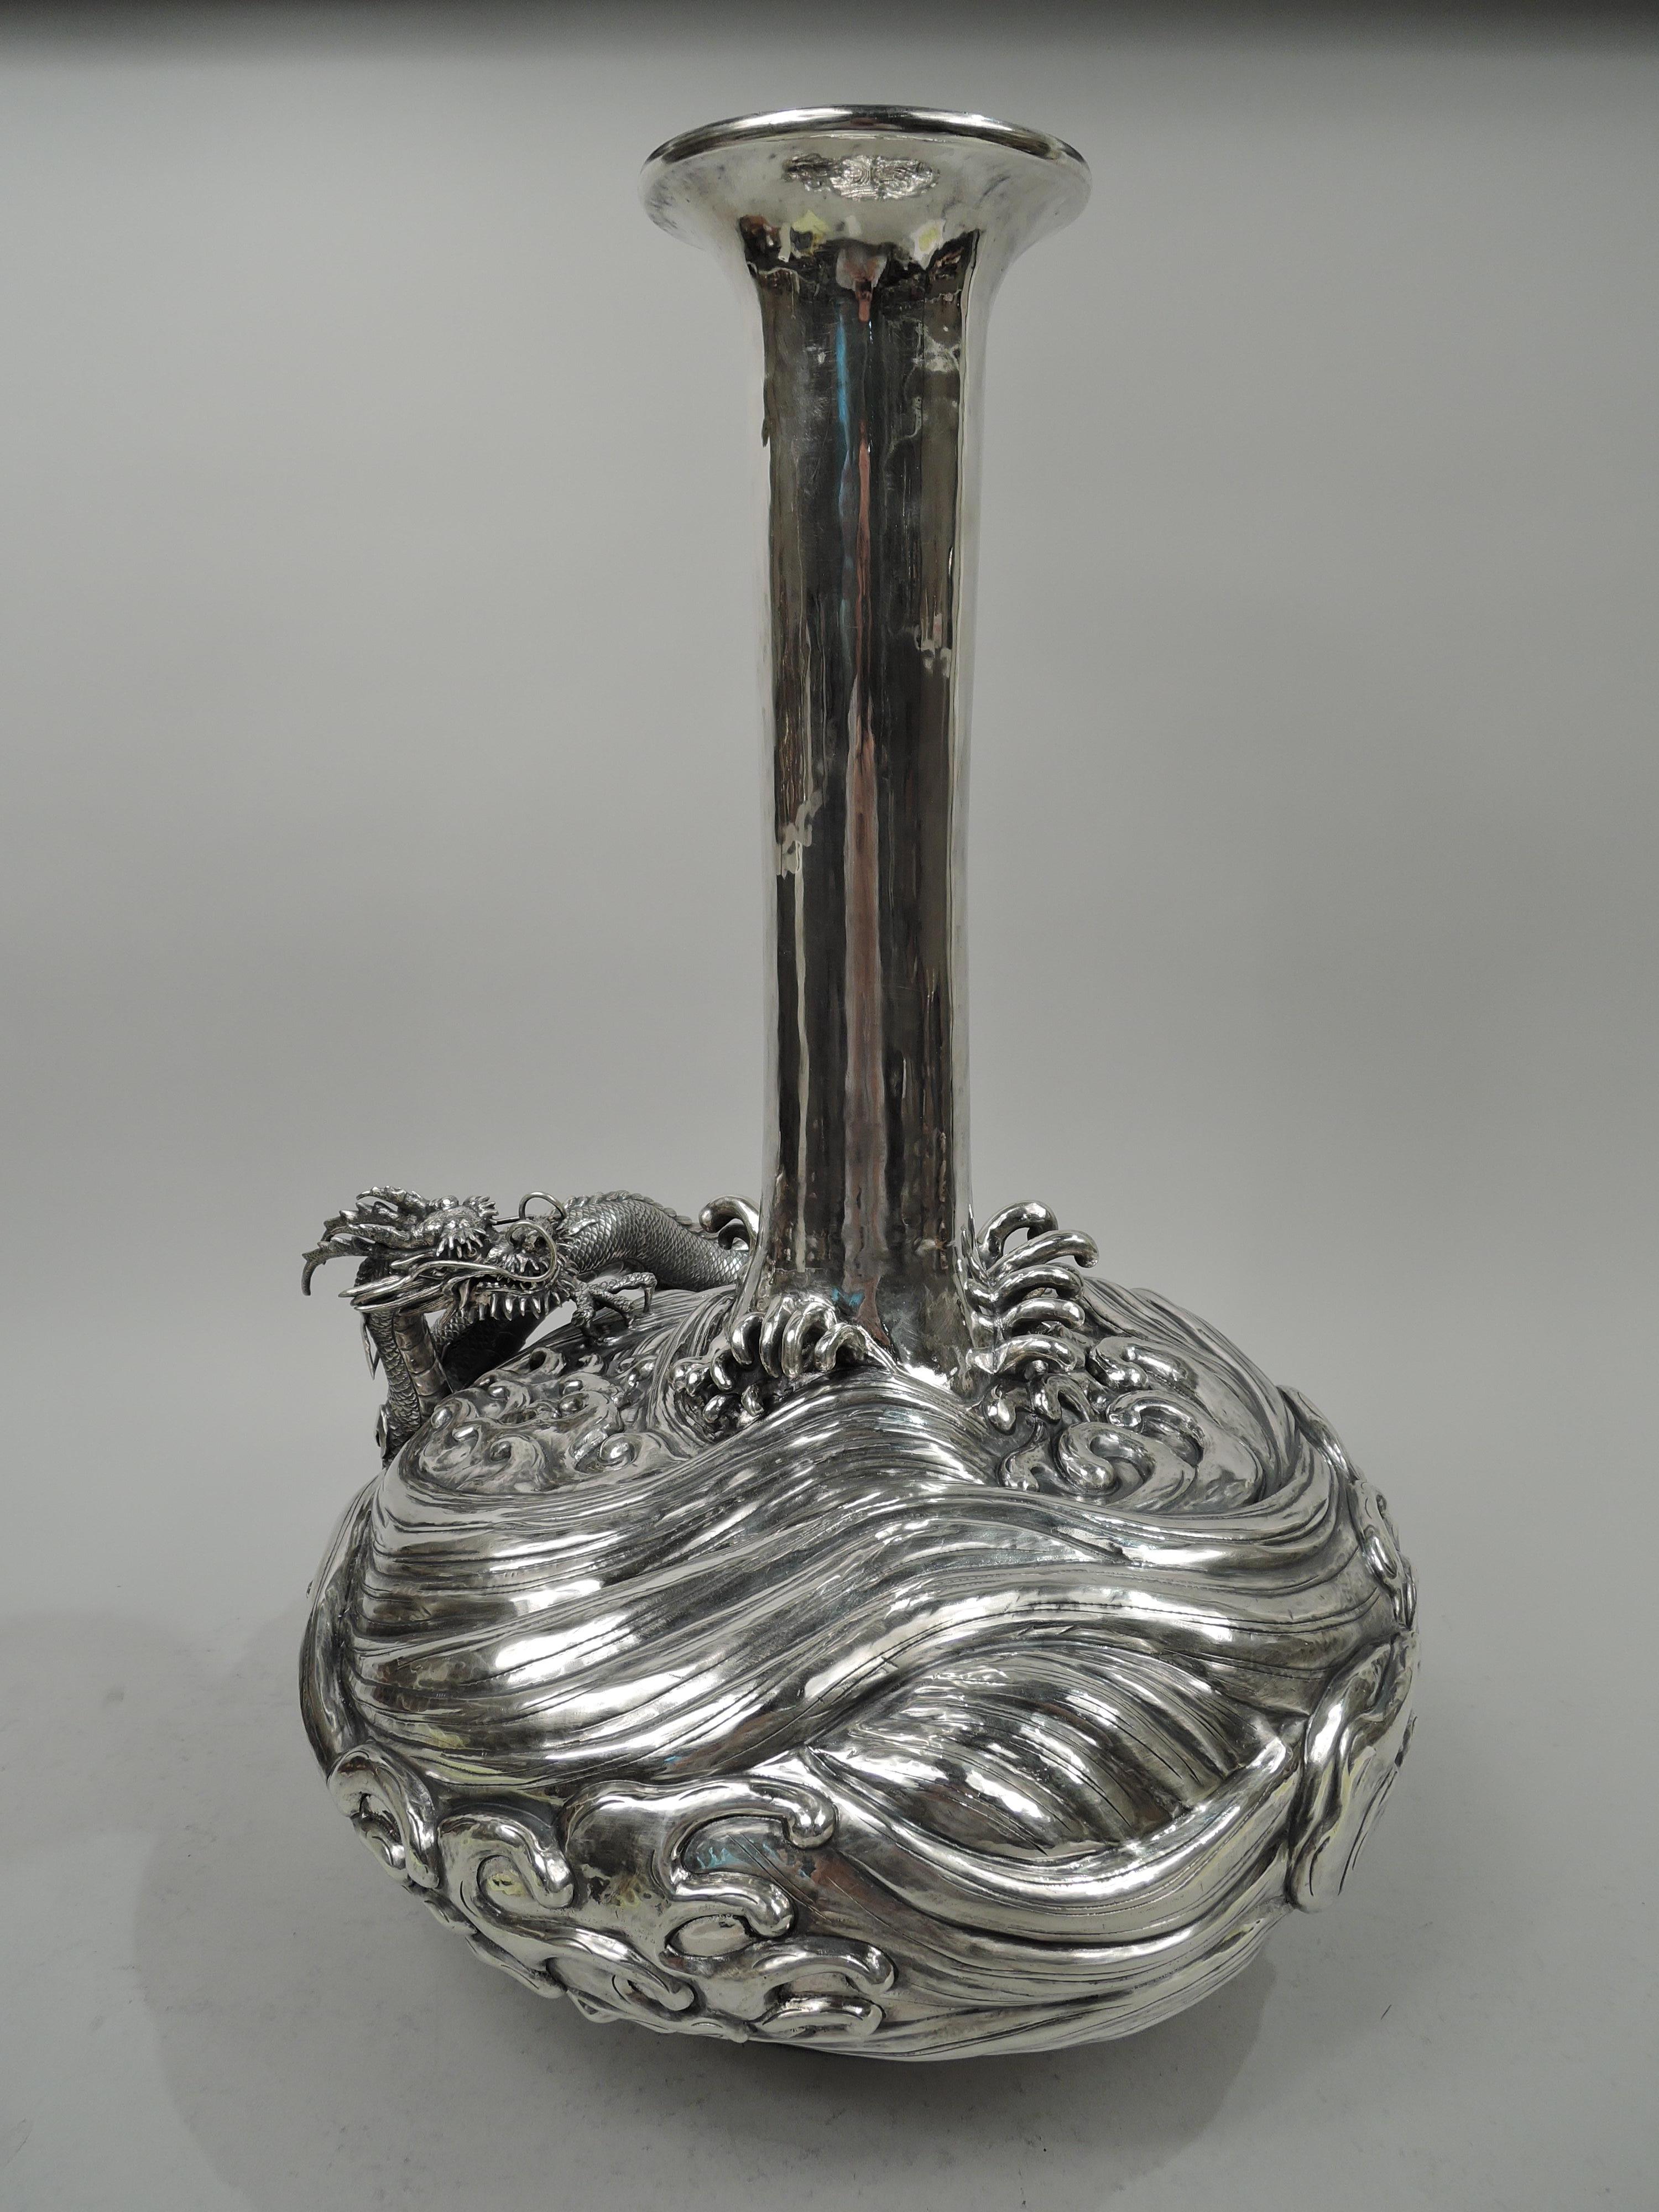 Dramatic Japanese Meiji silver centerpiece vase, ca 1900. Globular bowl with tall cylindrical neck and flared mouth; raised and inset foot. Bowl has wraparound roiling waves with claw-like spume in relief and a horned and scaley dragon, baring teeth